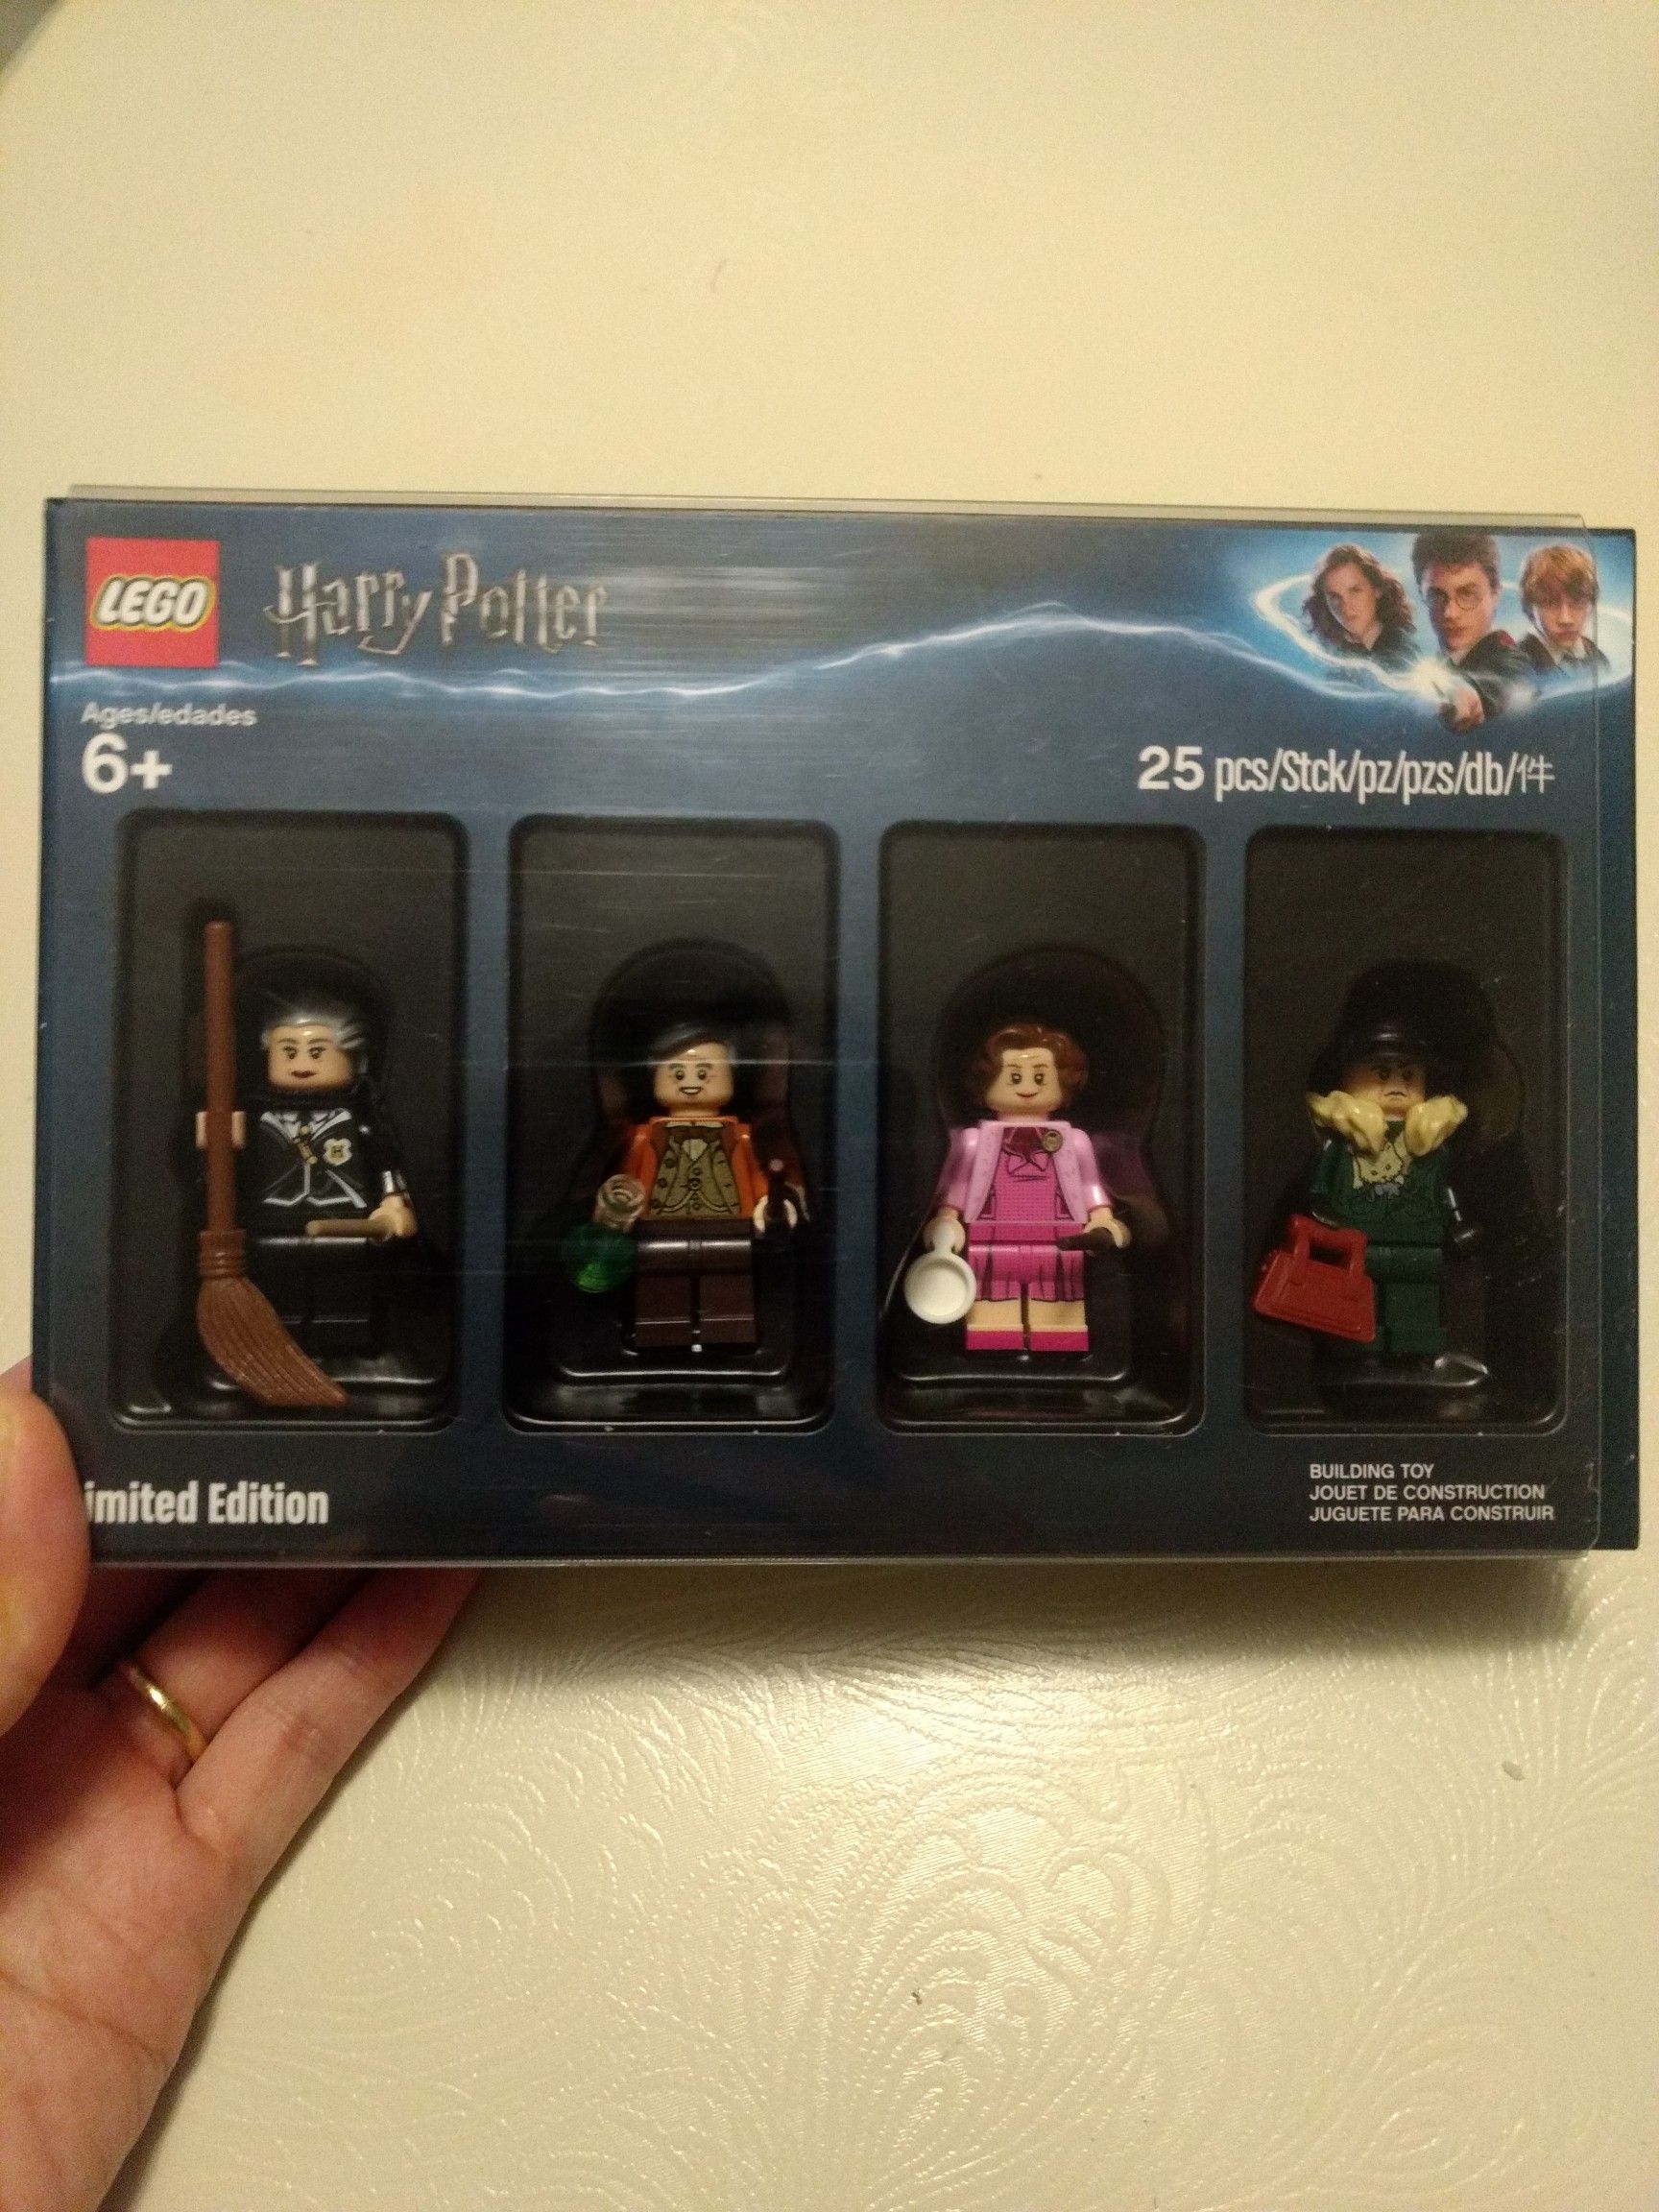 Lego Harry Potter limited edition